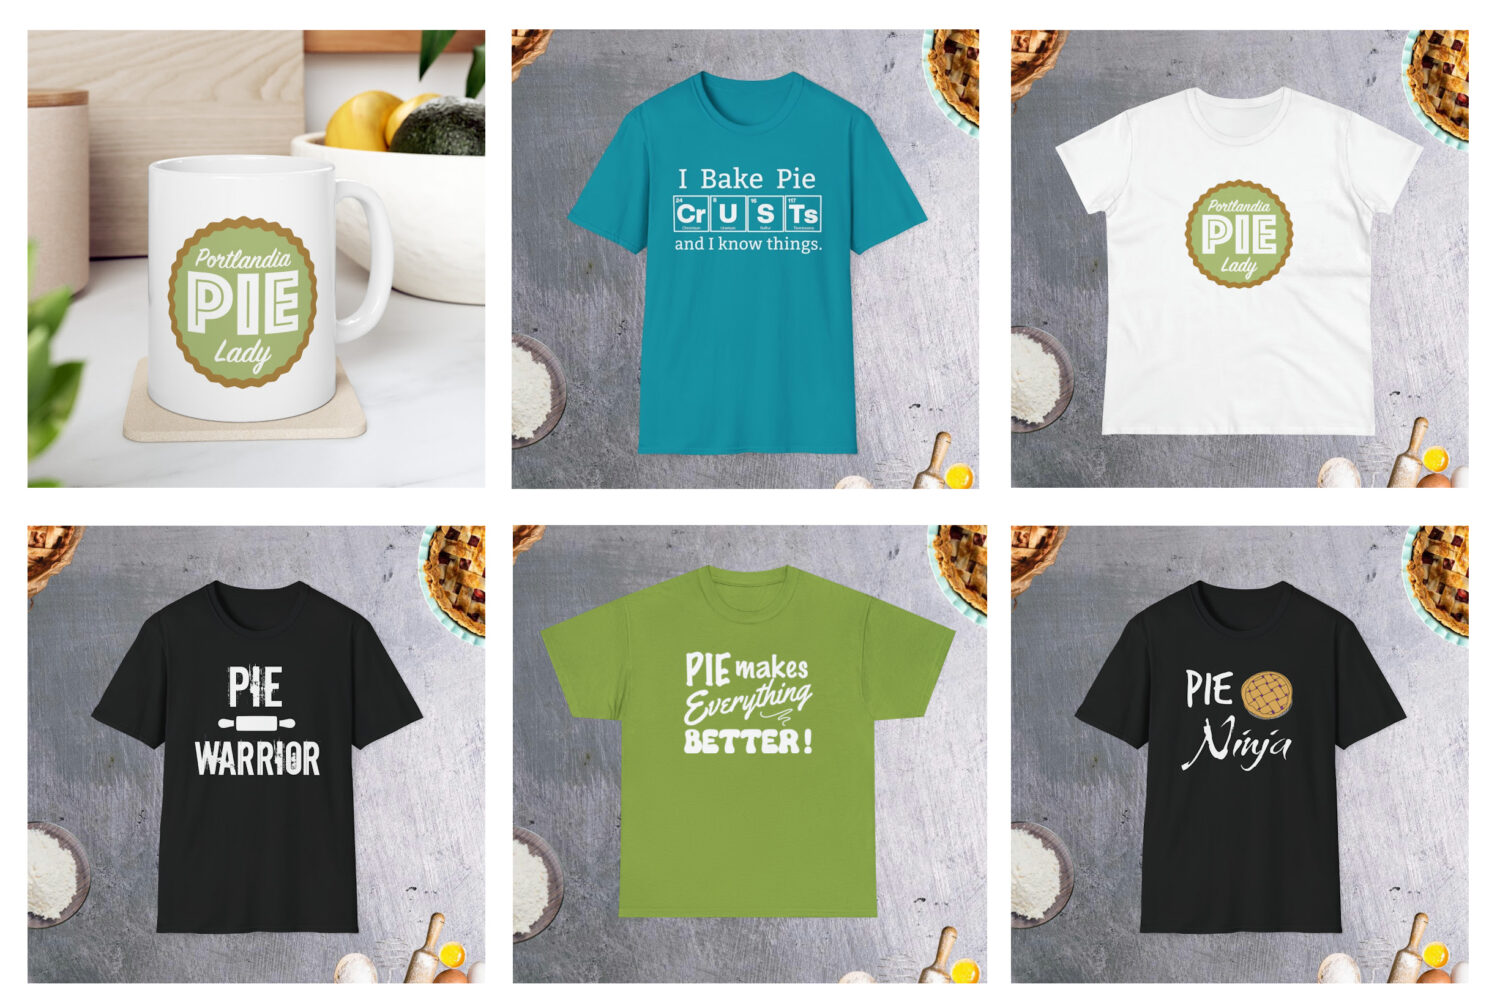 SWAG is Here! Portlandia Pie Lady graphic tees, cups and aprons! And there's a few tees unrelated to pie, just for fun!